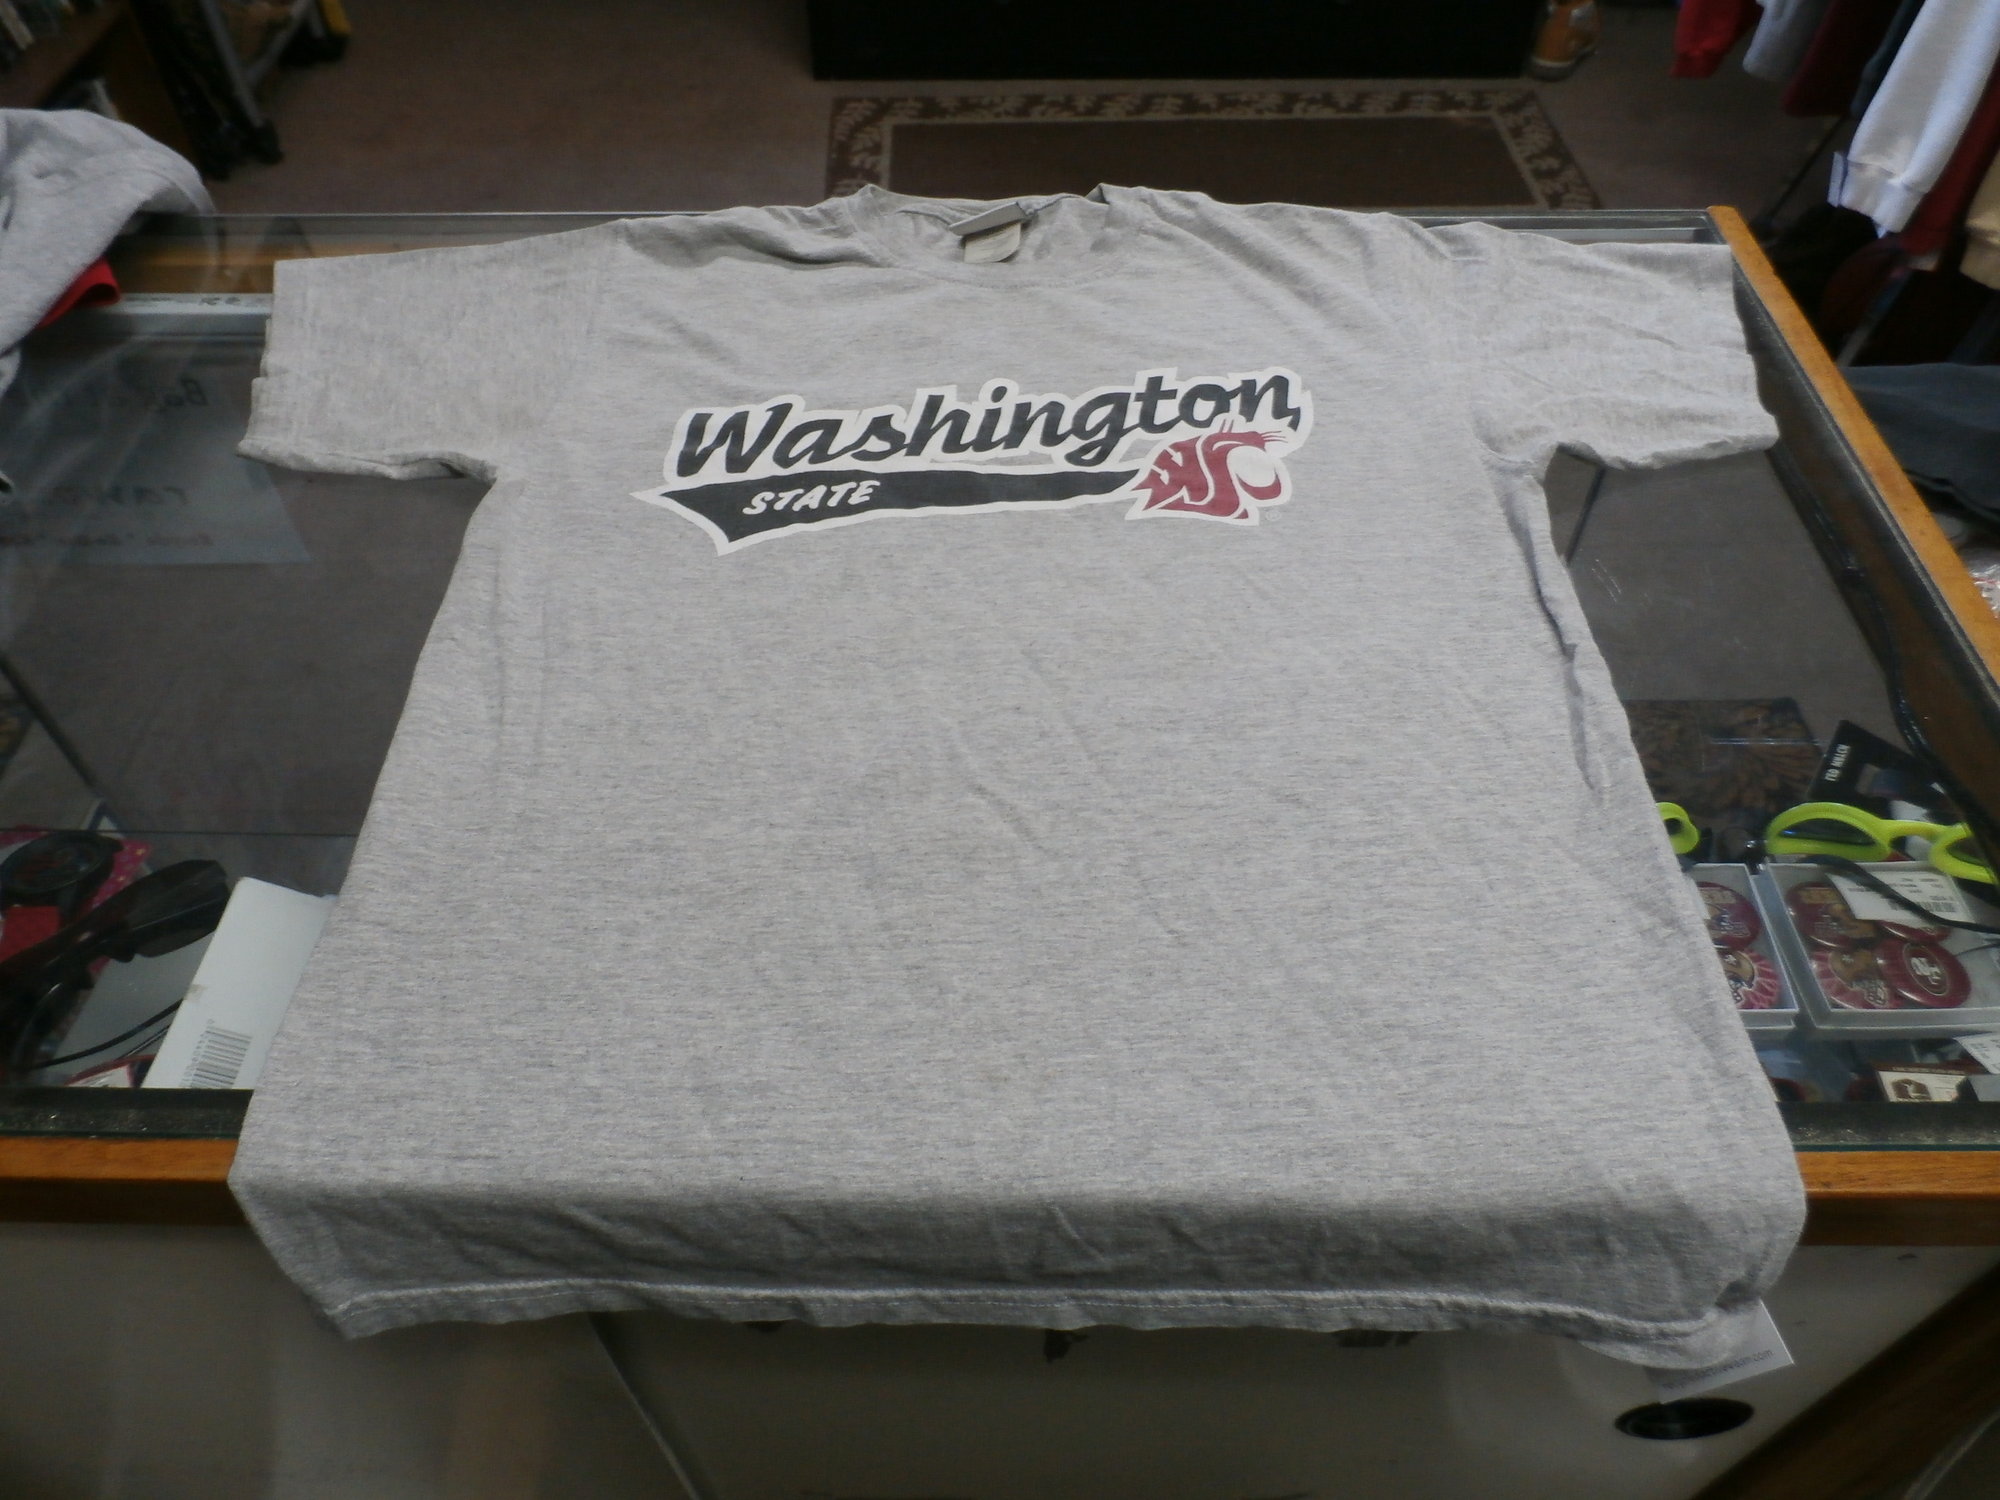 Washington State Cougars Jerzees Adult Short Sleeve Shirt Medium Gray #25307
Rating: (see below) 2 - Great Condition
Team: Washington State Cougars
Player: N/A
Brand: Jerzees
Size: Adult- Medium(Measured: Across chest 20\", length 27\")
Measured: Armpit to armpit; shoulder to hem
Color: Gray
Style: short sleeve; screen pressed logo
Material: 90% Cotton 10% Polyester
Condition: 3 - Good Condition - wrinkled; pilling and fuzz; feels coarse; logo is cracked and worn; definite signs of use; no stains rips or holes
Item #:  25307
Shipping: FREE